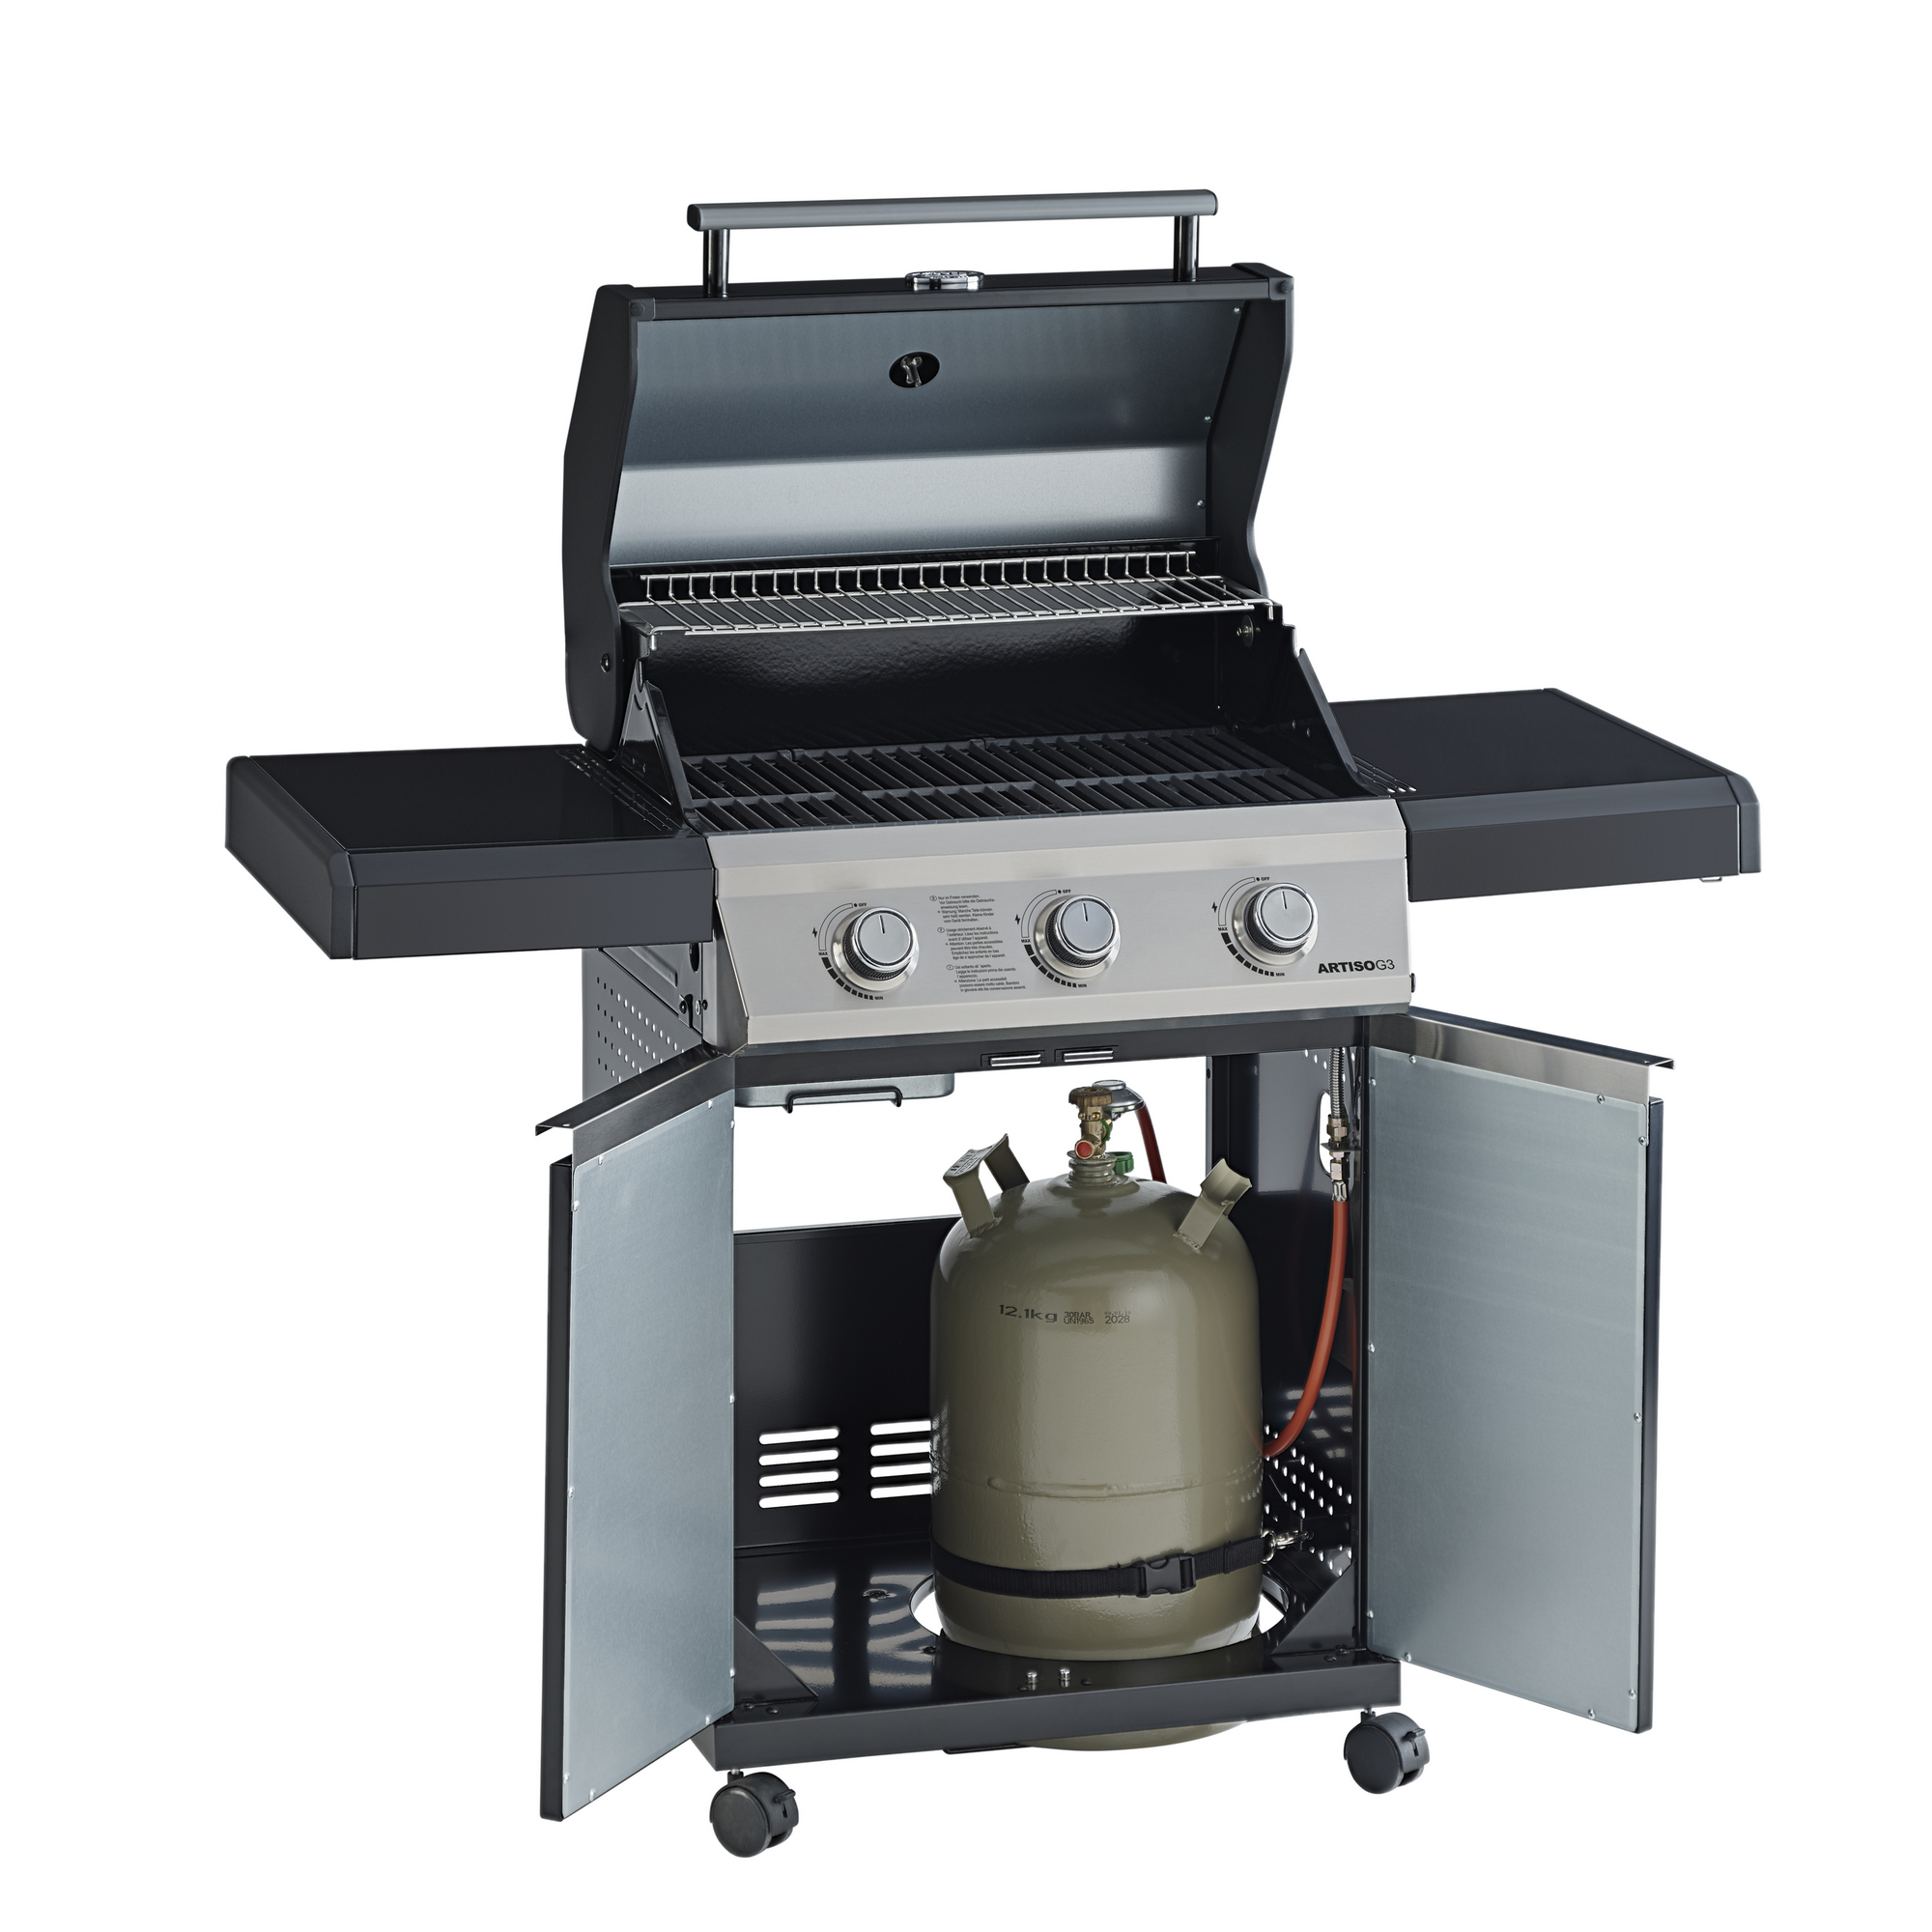 BBQ-Station 'Artiso G3' schwarz + product picture